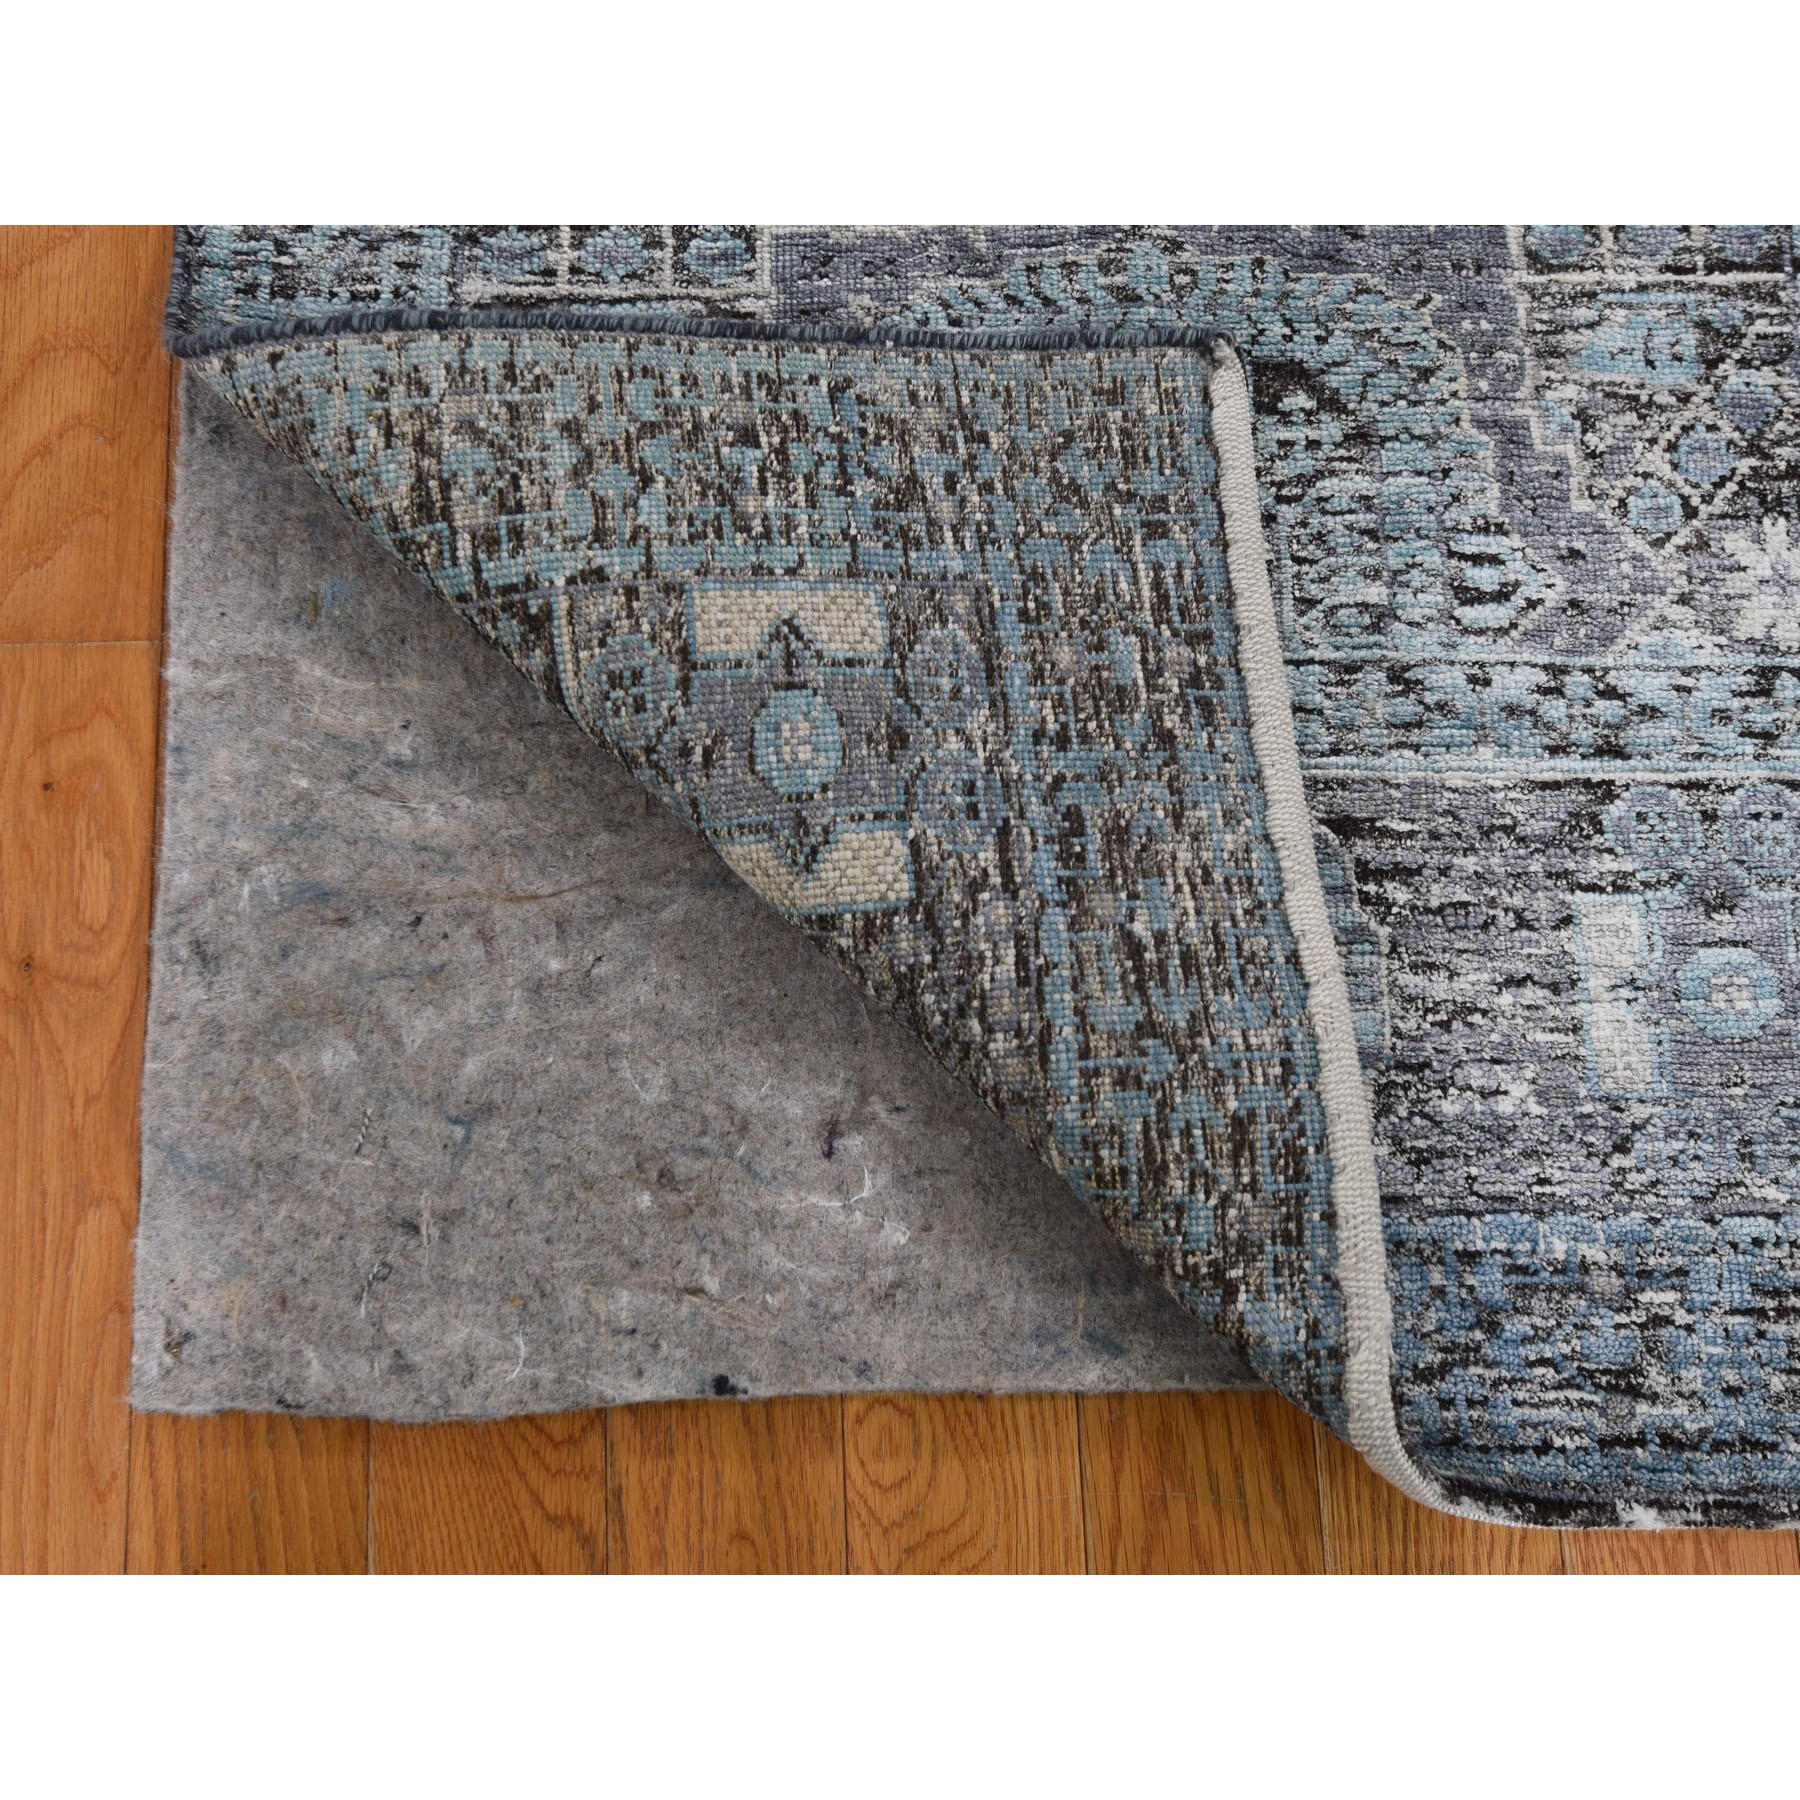 2-5 x6- Silk With Textured Wool Hi-Low Pile Mamluk Design Runner Hand Knotted Oriental Rug 